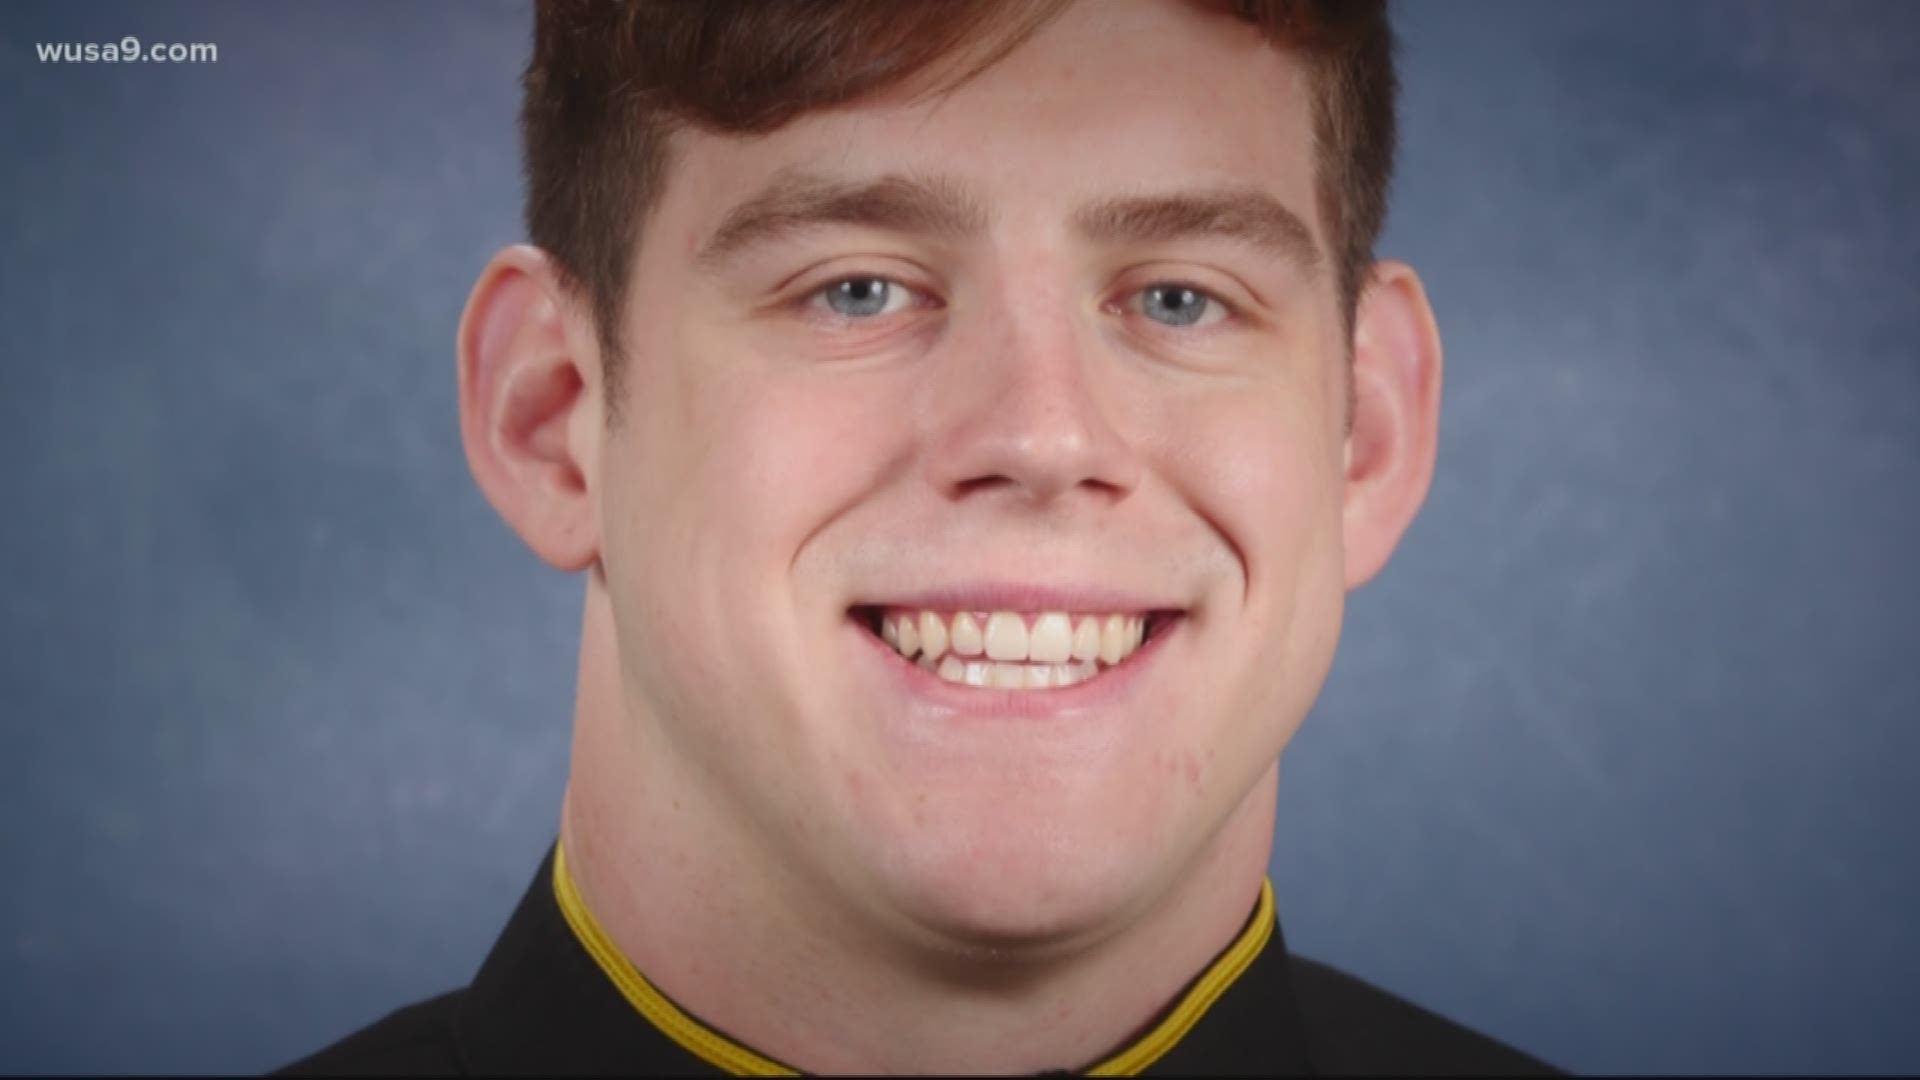 Naval Academy midshipman and football player David Forney, 22, was found dead in a residential hall on base in Annapolis, Thursday night.